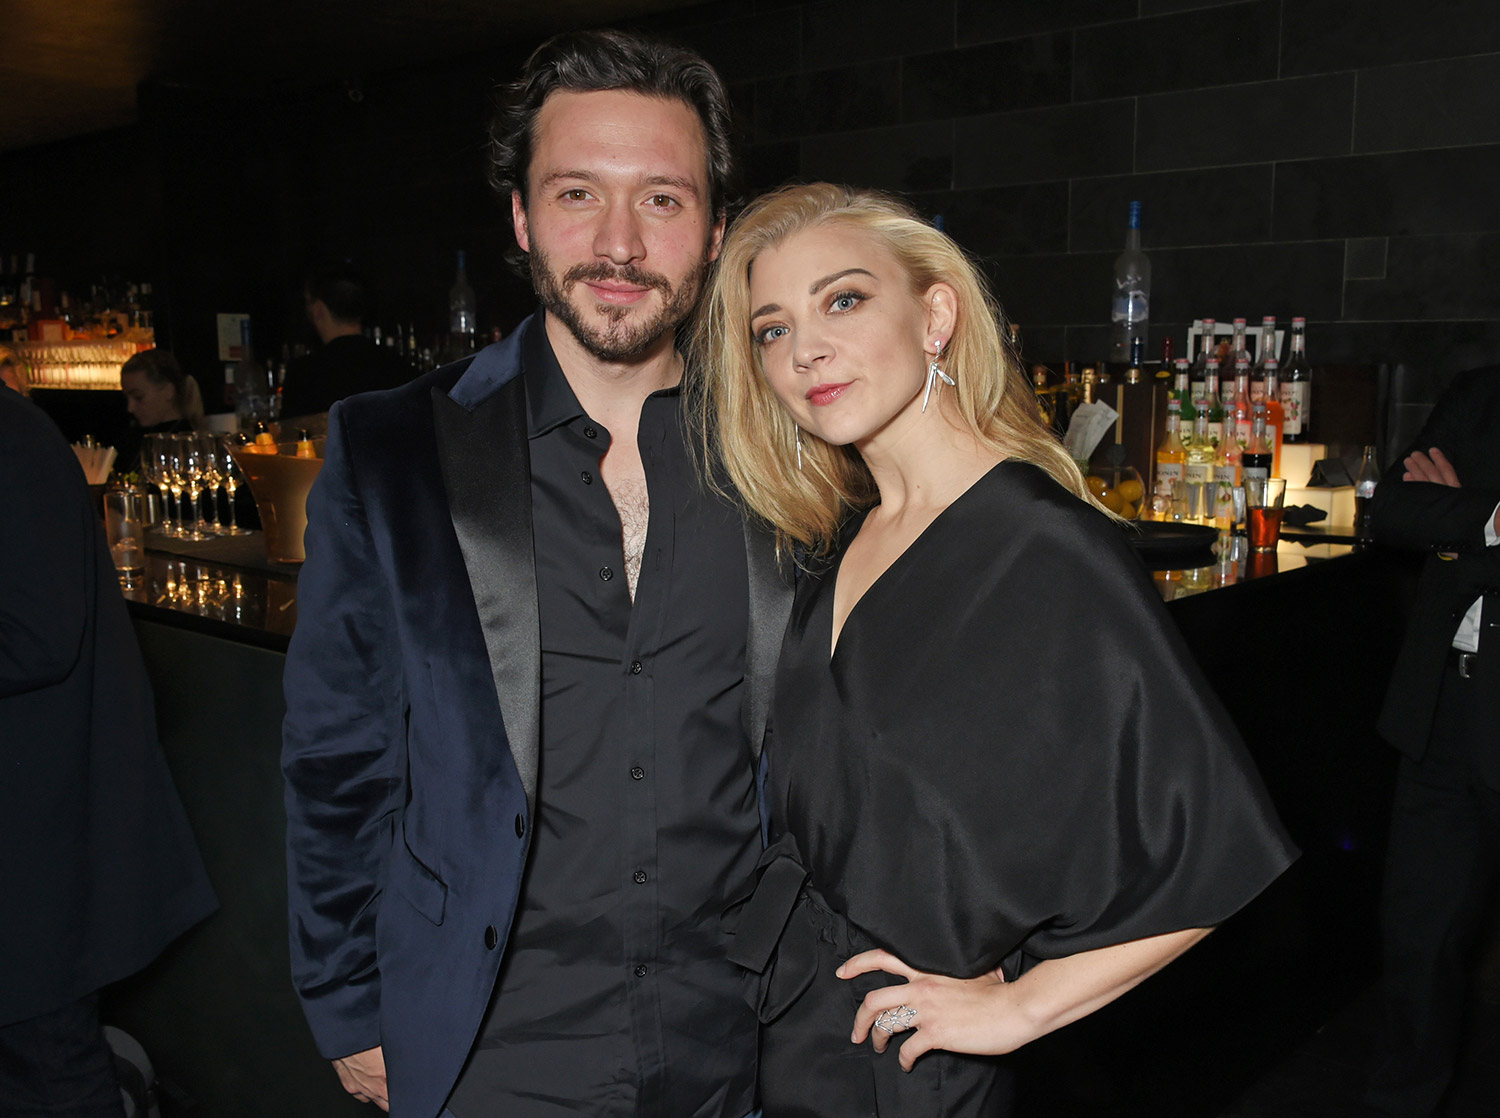 Natalie Dormer with her boyfriend, David Oakes, at the after party of 'Venus In Fur.'